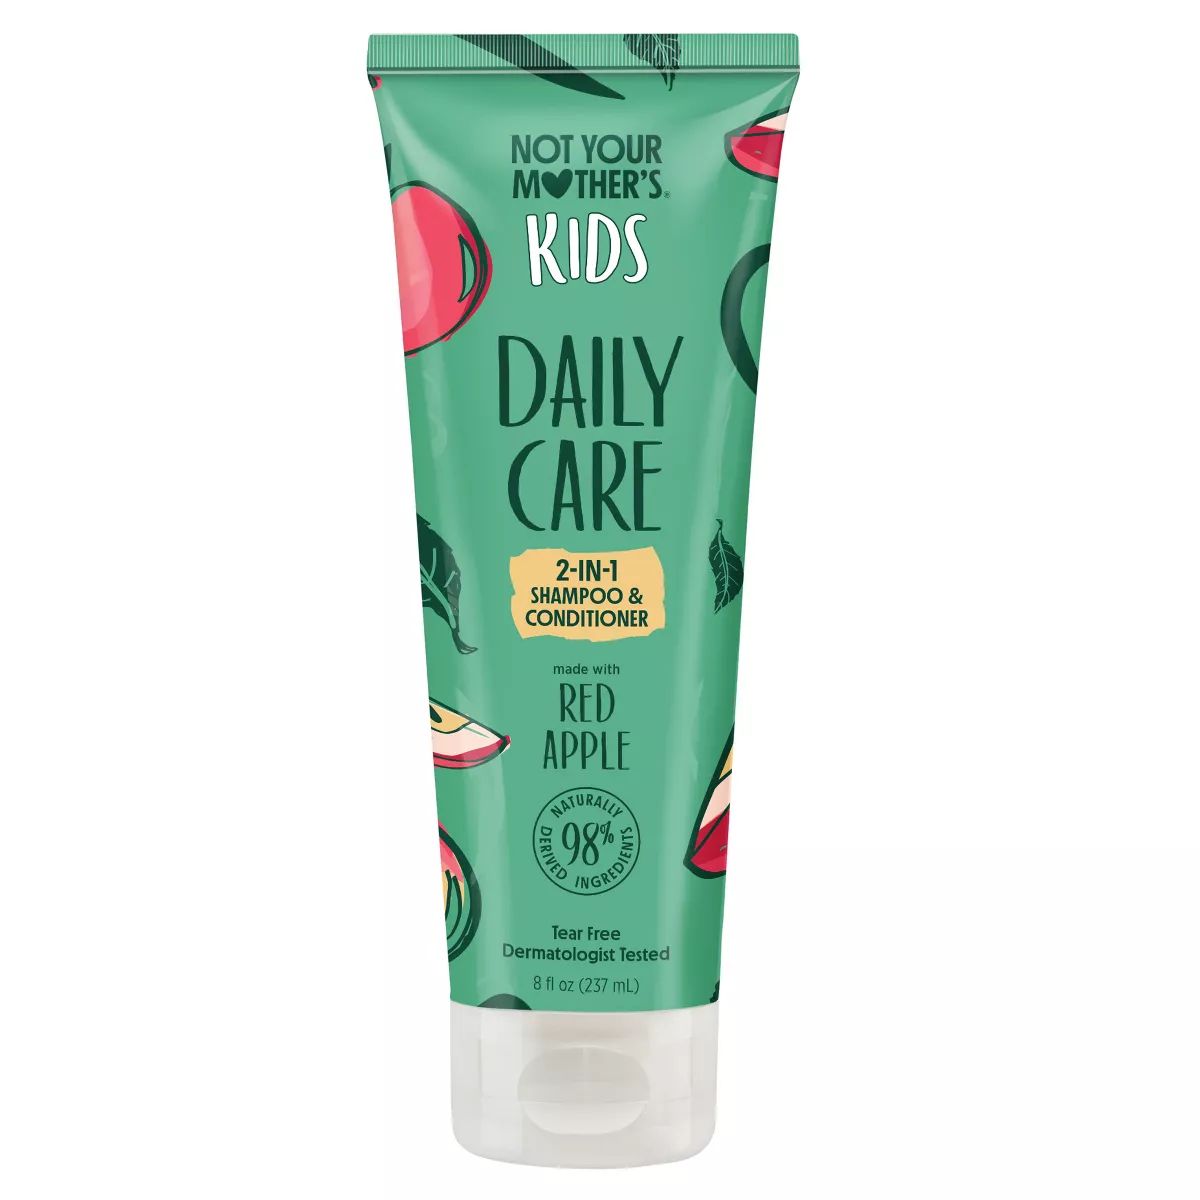 Not Your Mother's Kids' Daily Care 2-in-1 Shampoo and Conditioner - 8 fl oz | Target